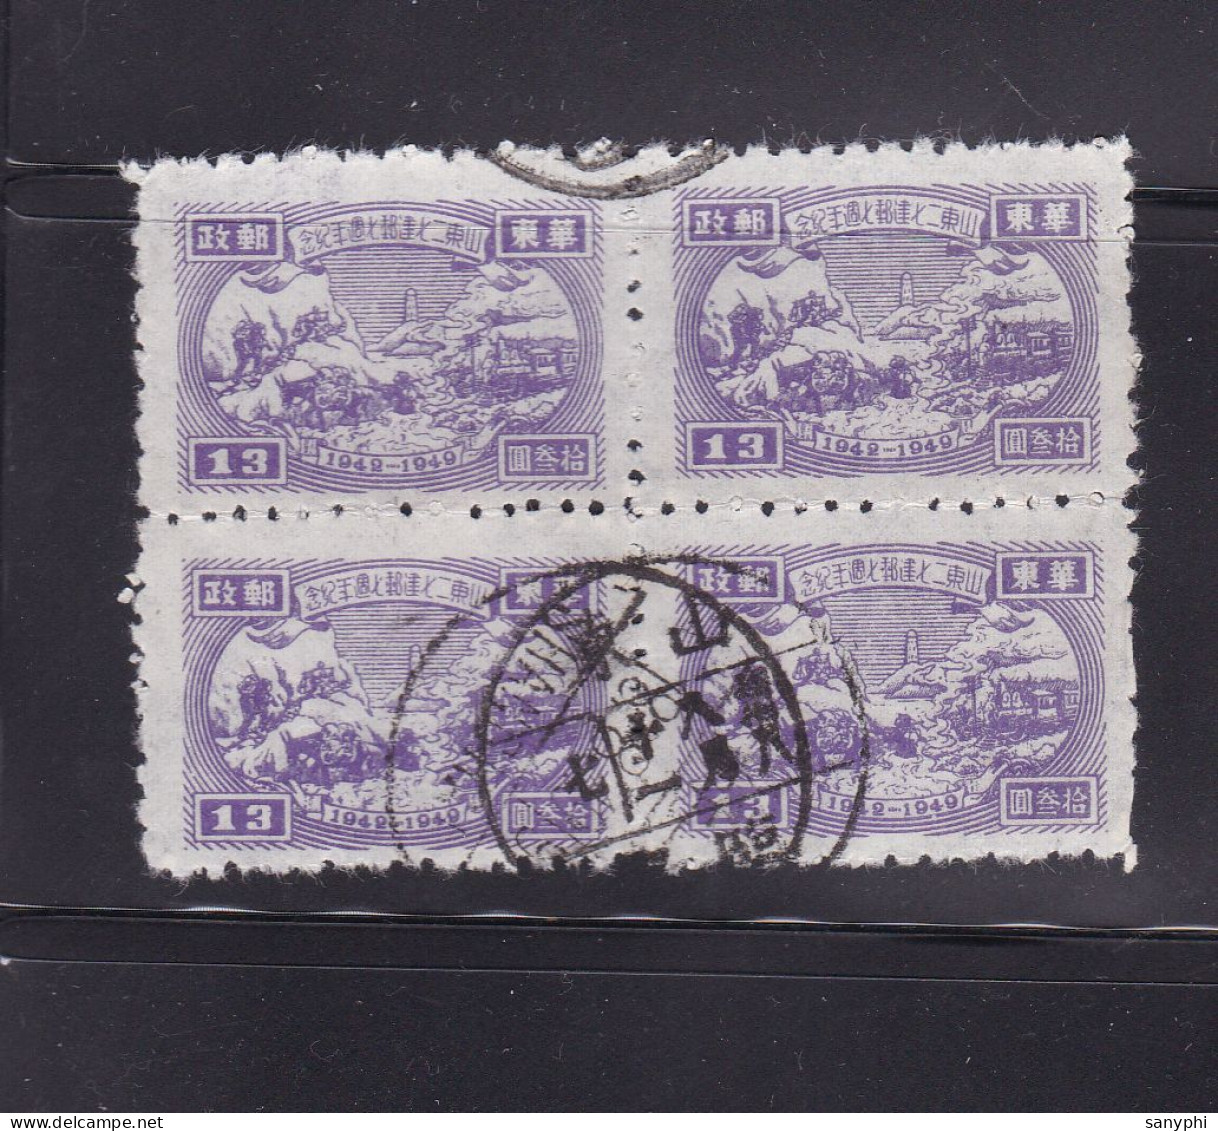 1949 East Cina China Chine SgEC327 4 Used Stamps Cxl By Shangdong  - Neufs